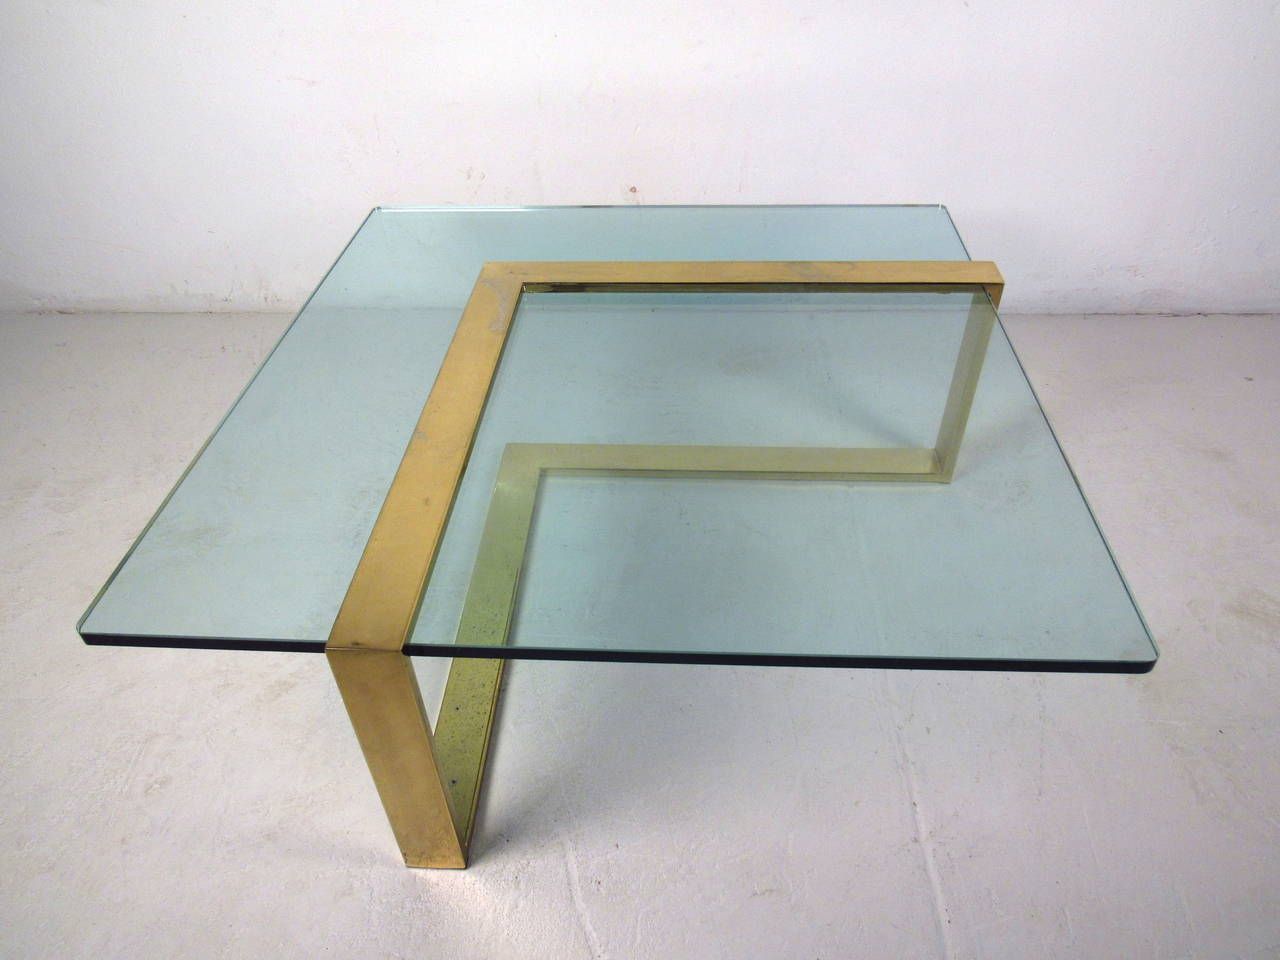 Brass L Shape Coffee Table With Glass Top At 1stdibs For L Shaped Coffee Tables (View 6 of 15)